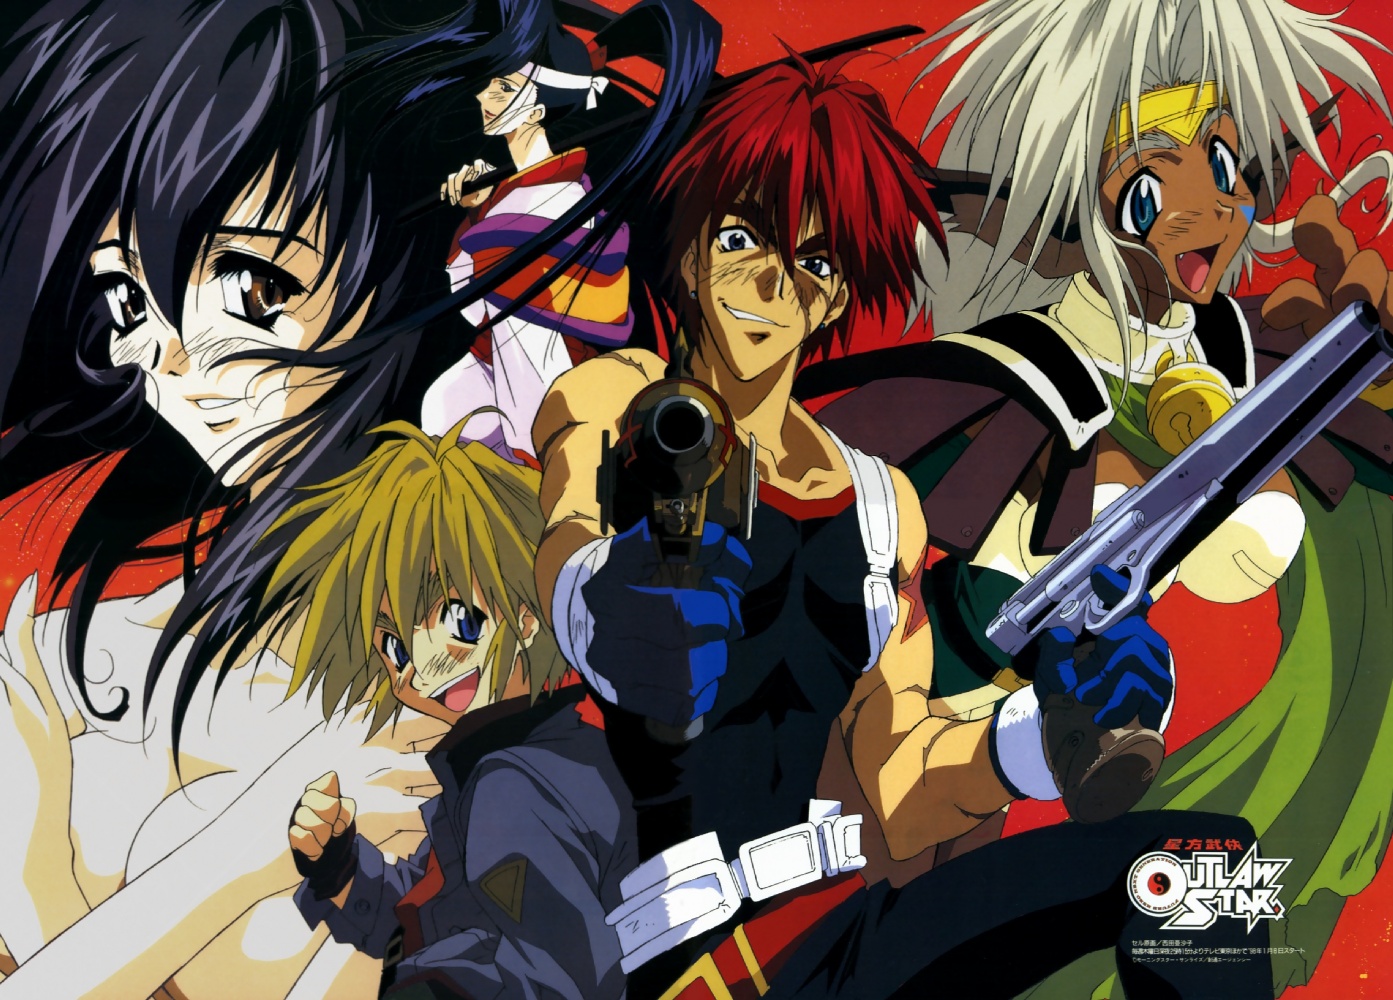 Outlaw Star #3